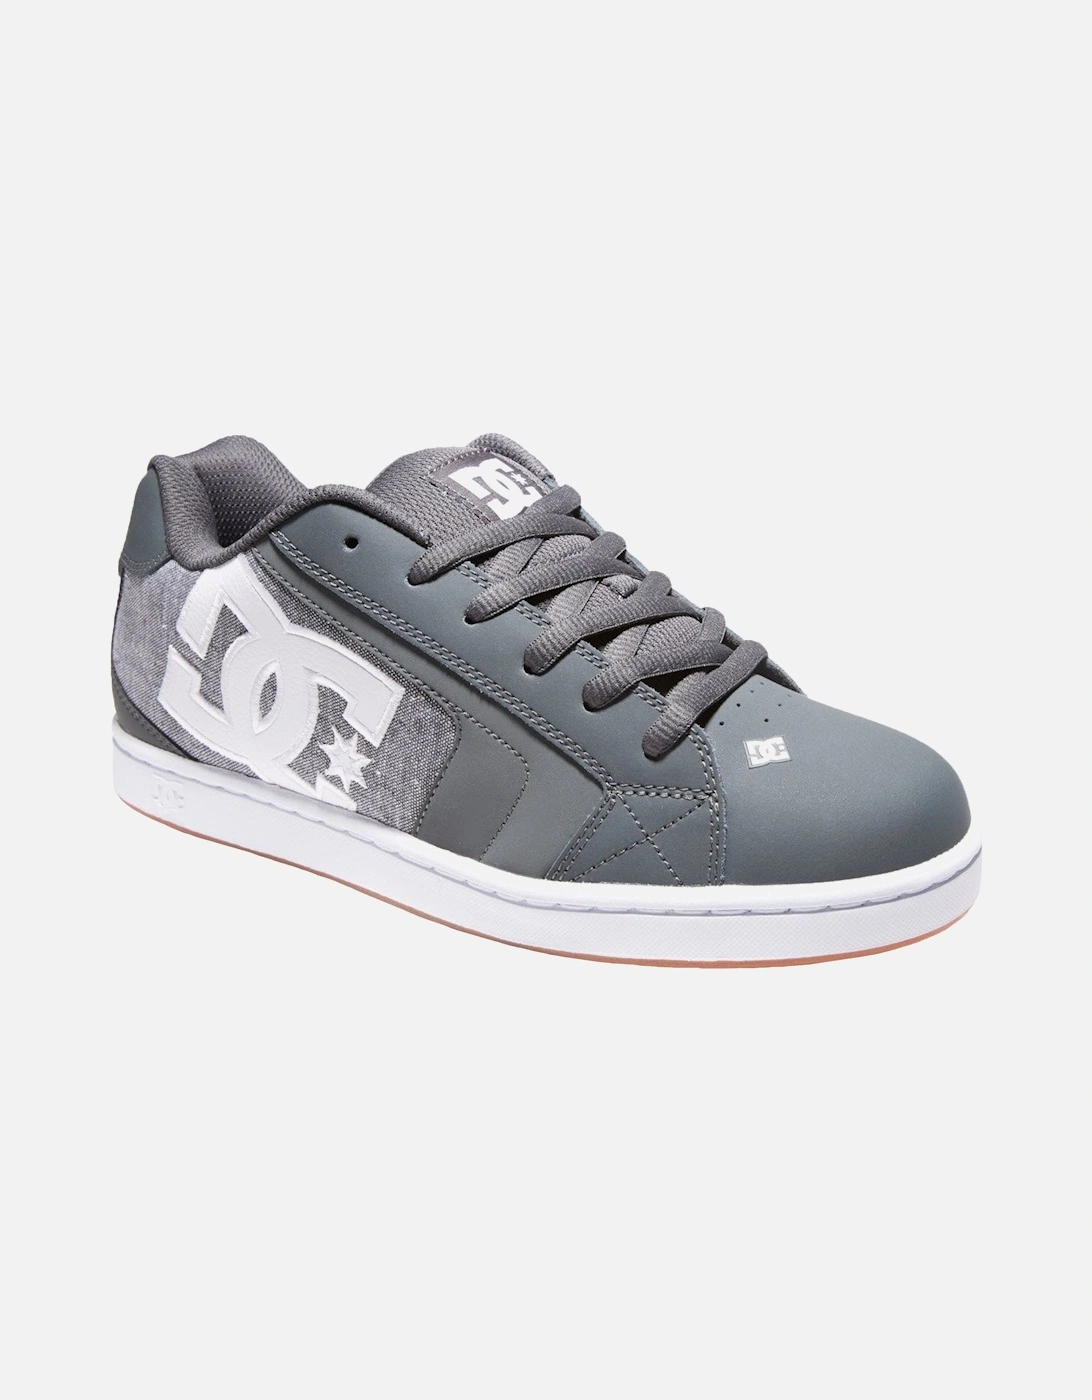 Mens Net Leather Low Rise Trainers, 38 of 37